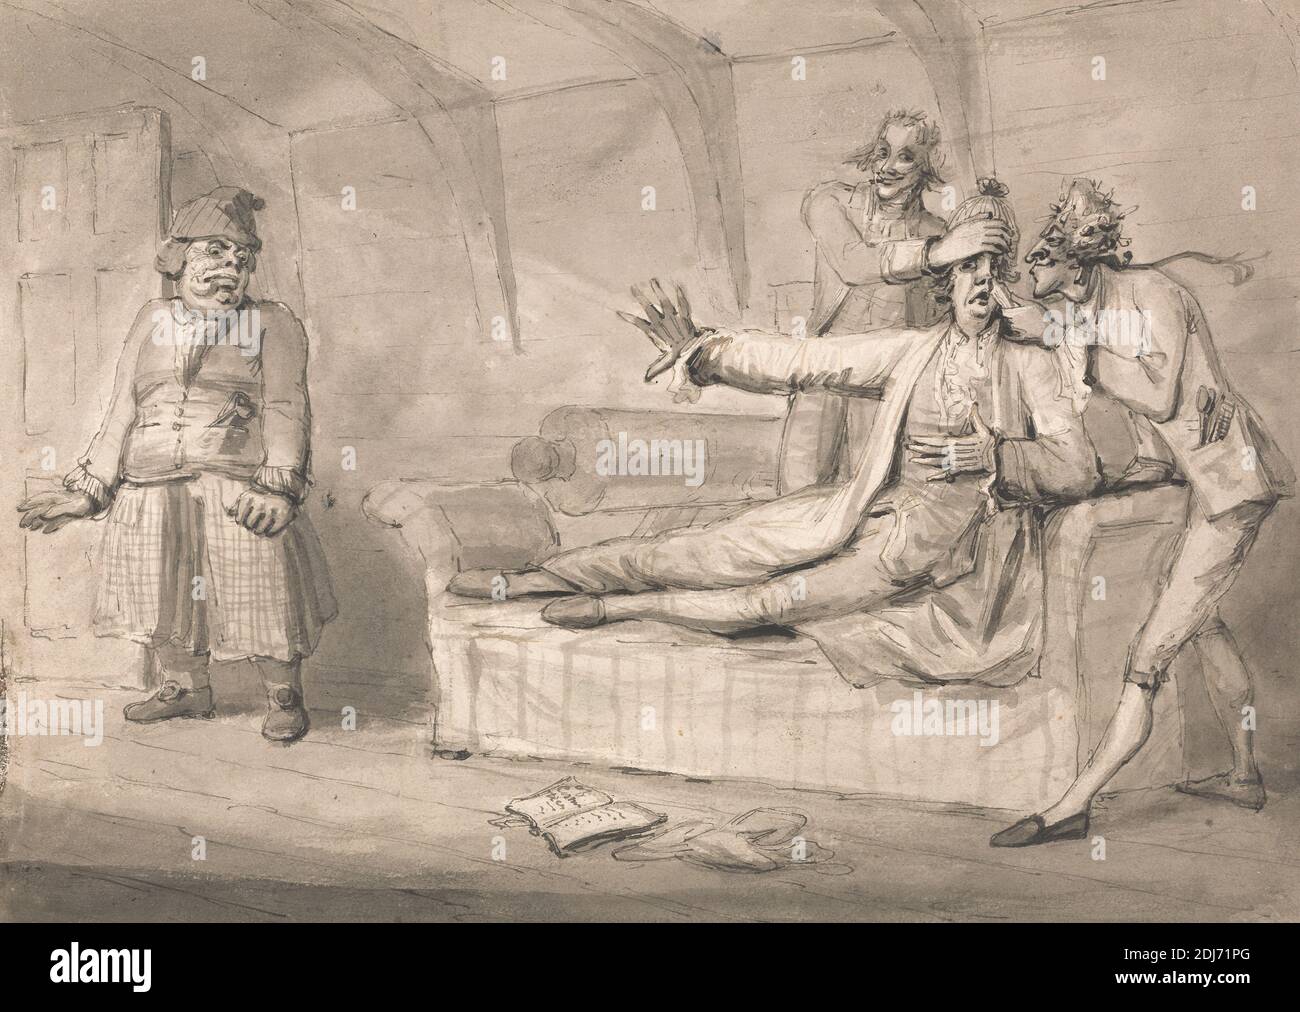 Morgan Offending the Delicate Organs of Captain Wiffle, Samuel Collings, active 1784–1795, British, undated, Graphite, gray wash, brown wash, pen and gray ink on medium, slightly textured, cream wove paper, Sheet: 7 3/8 x 10 3/8 inches (18.7 x 26.4 cm), books, comedy, couches, drama, expression, genre subject, gesture, men, smell Stock Photo